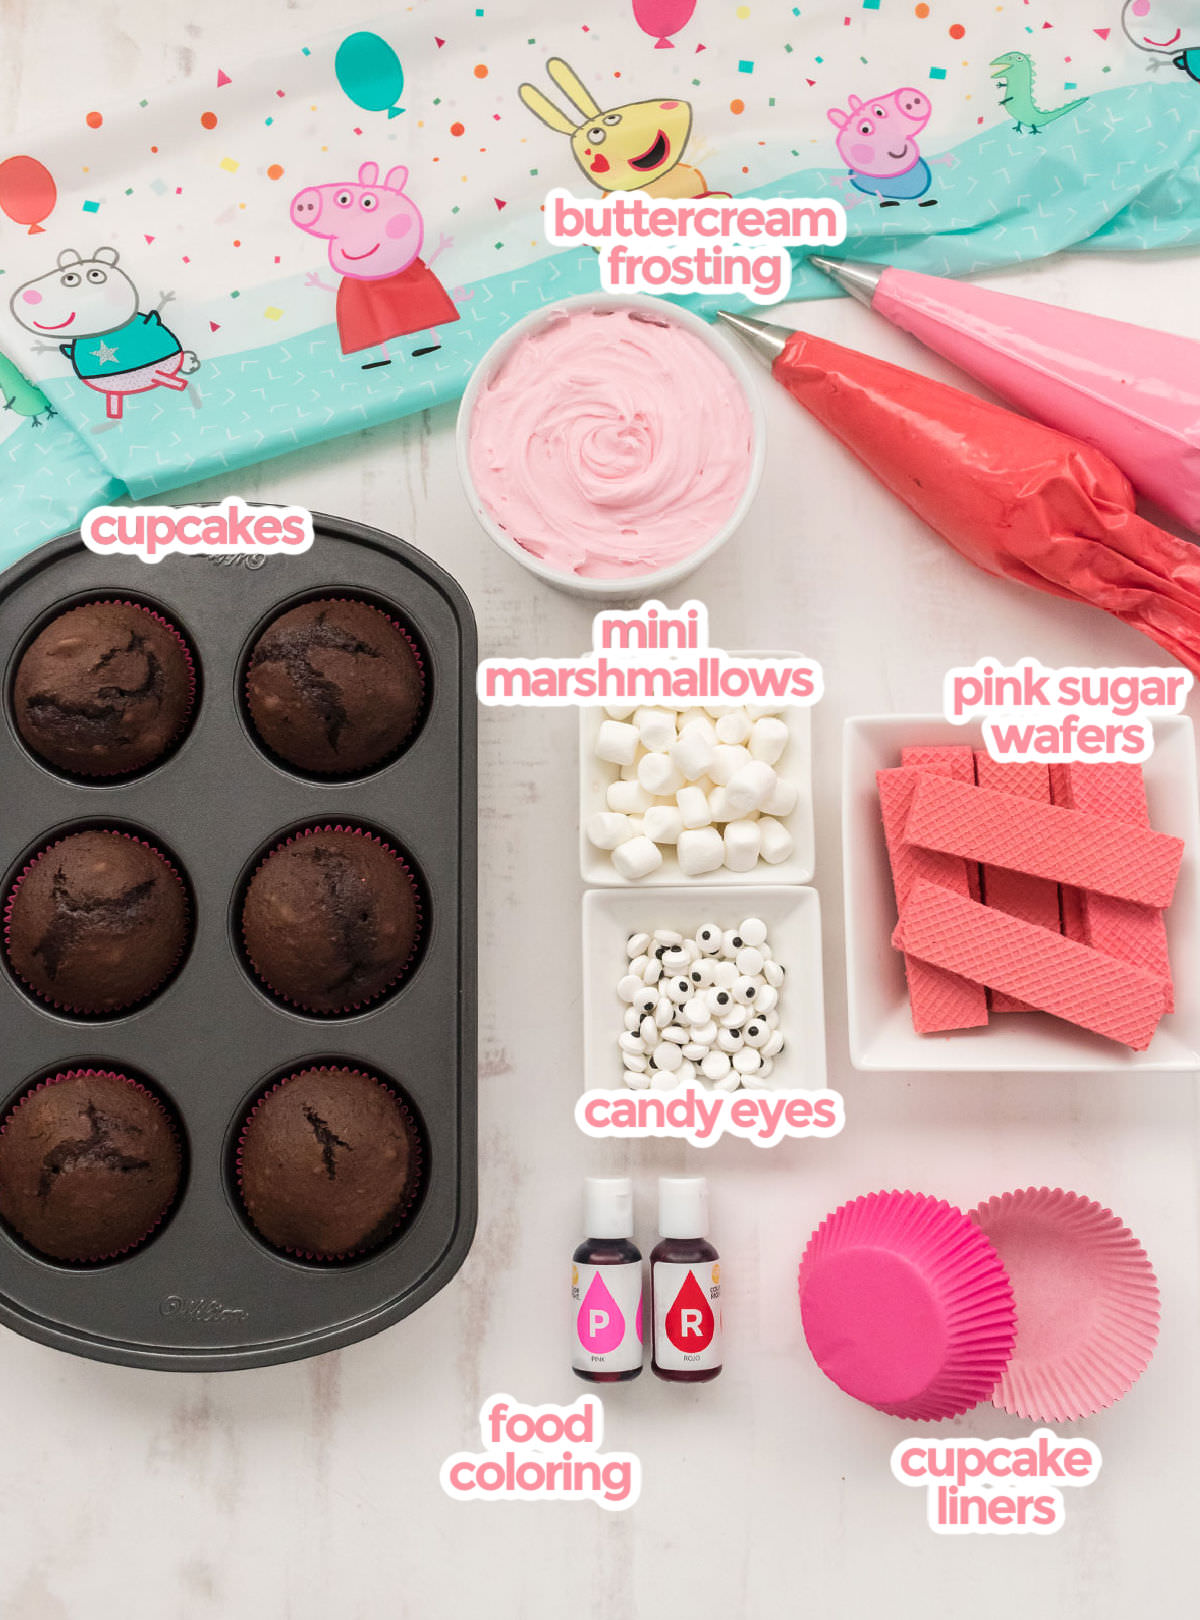 All the ingredients you will need to make Peppa Pig Cupcakes including cupcakes, buttercream frosting, food coloring, pink sugar wafers, mini marshmallows, candy eyes and cupcake liners.